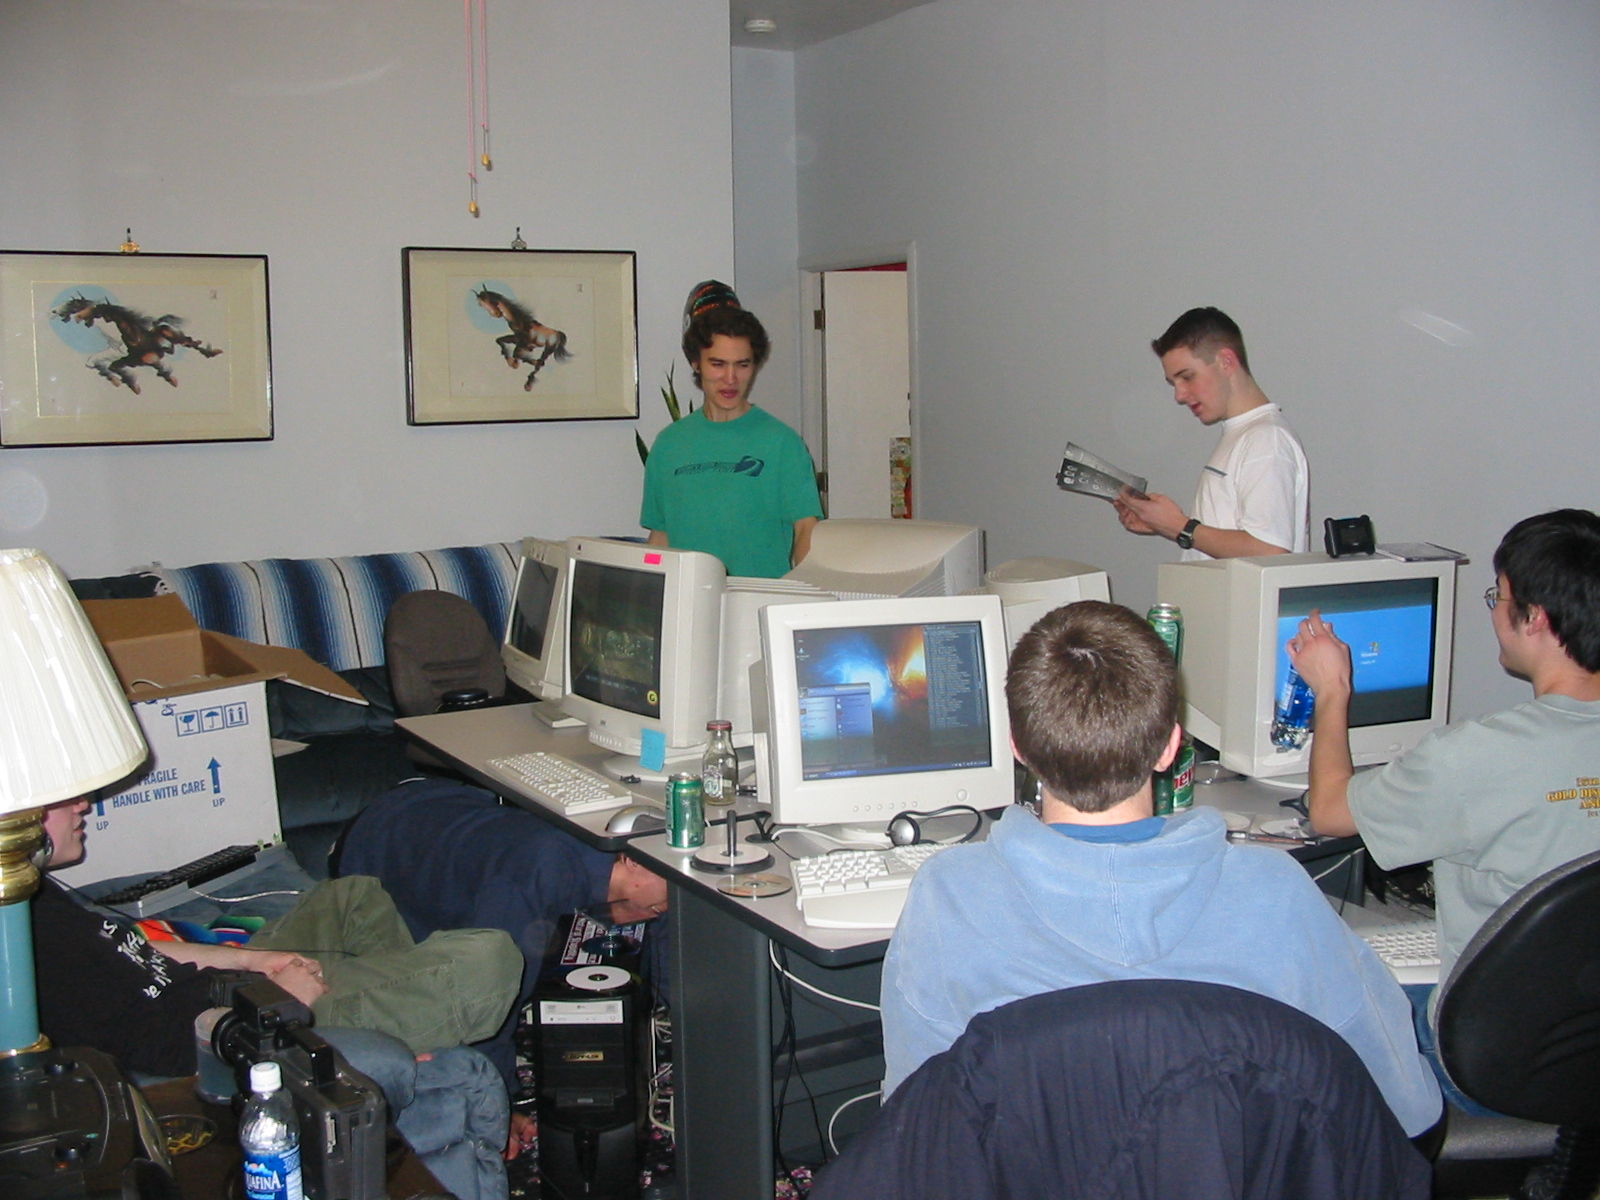 A group of gamers surround a table covered with CRT monitors in large room.